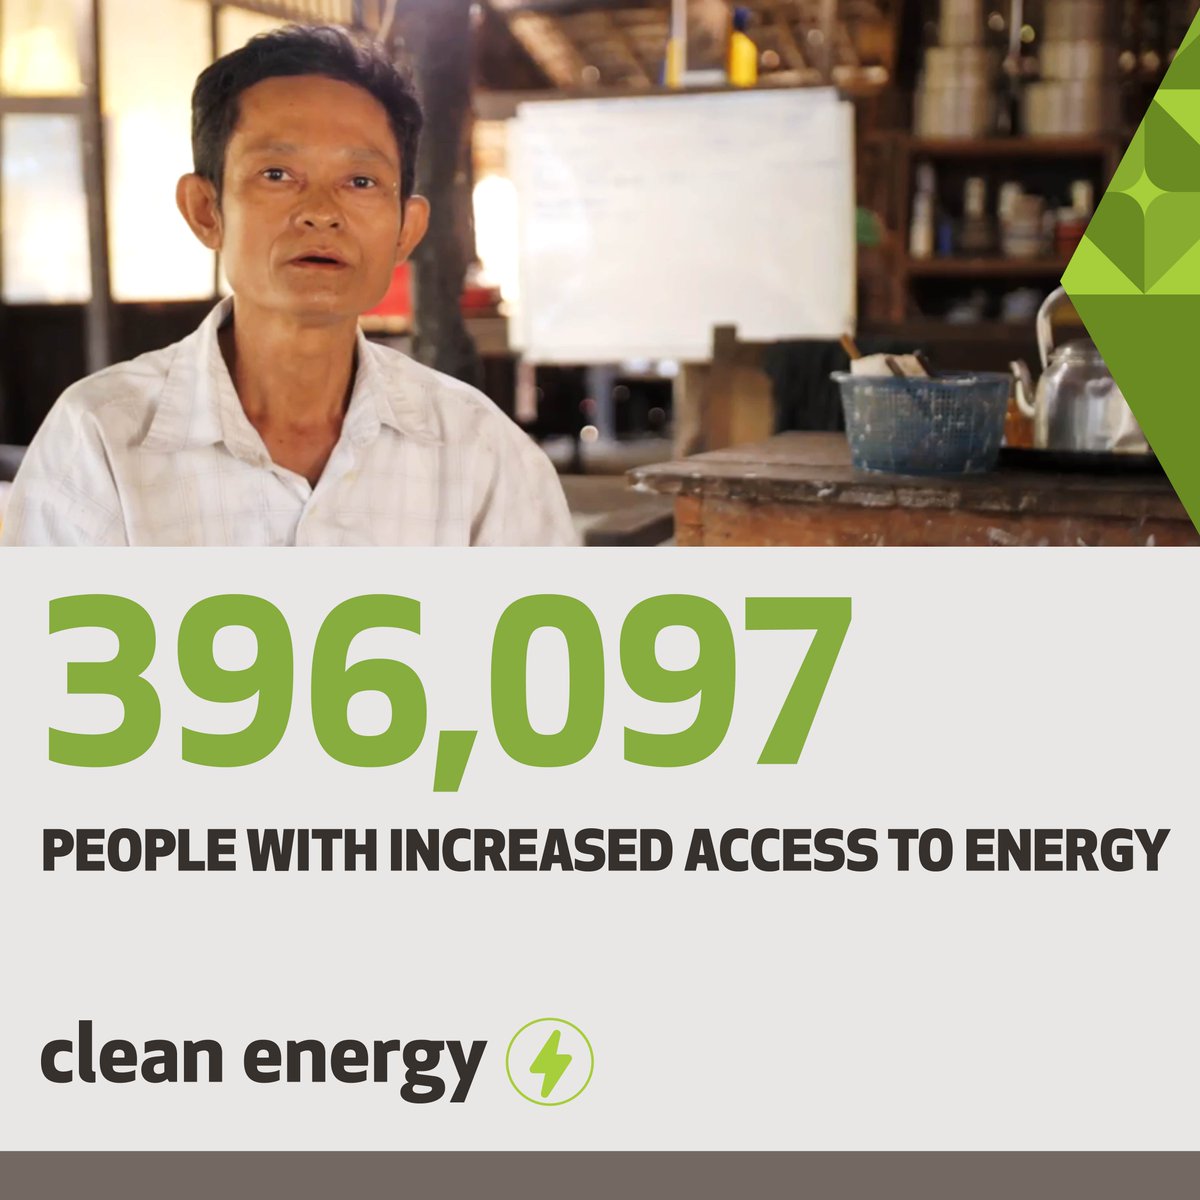 Without access to reliable, sustainable, affordable clean energy sources, entrepreneurship, modern healthcare or basic needs are out of reach for > 1️⃣ billion people. ~400,000 people had increased access to #energy last year w/ Pact's support. Learn more: bit.ly/3PmL5zr.